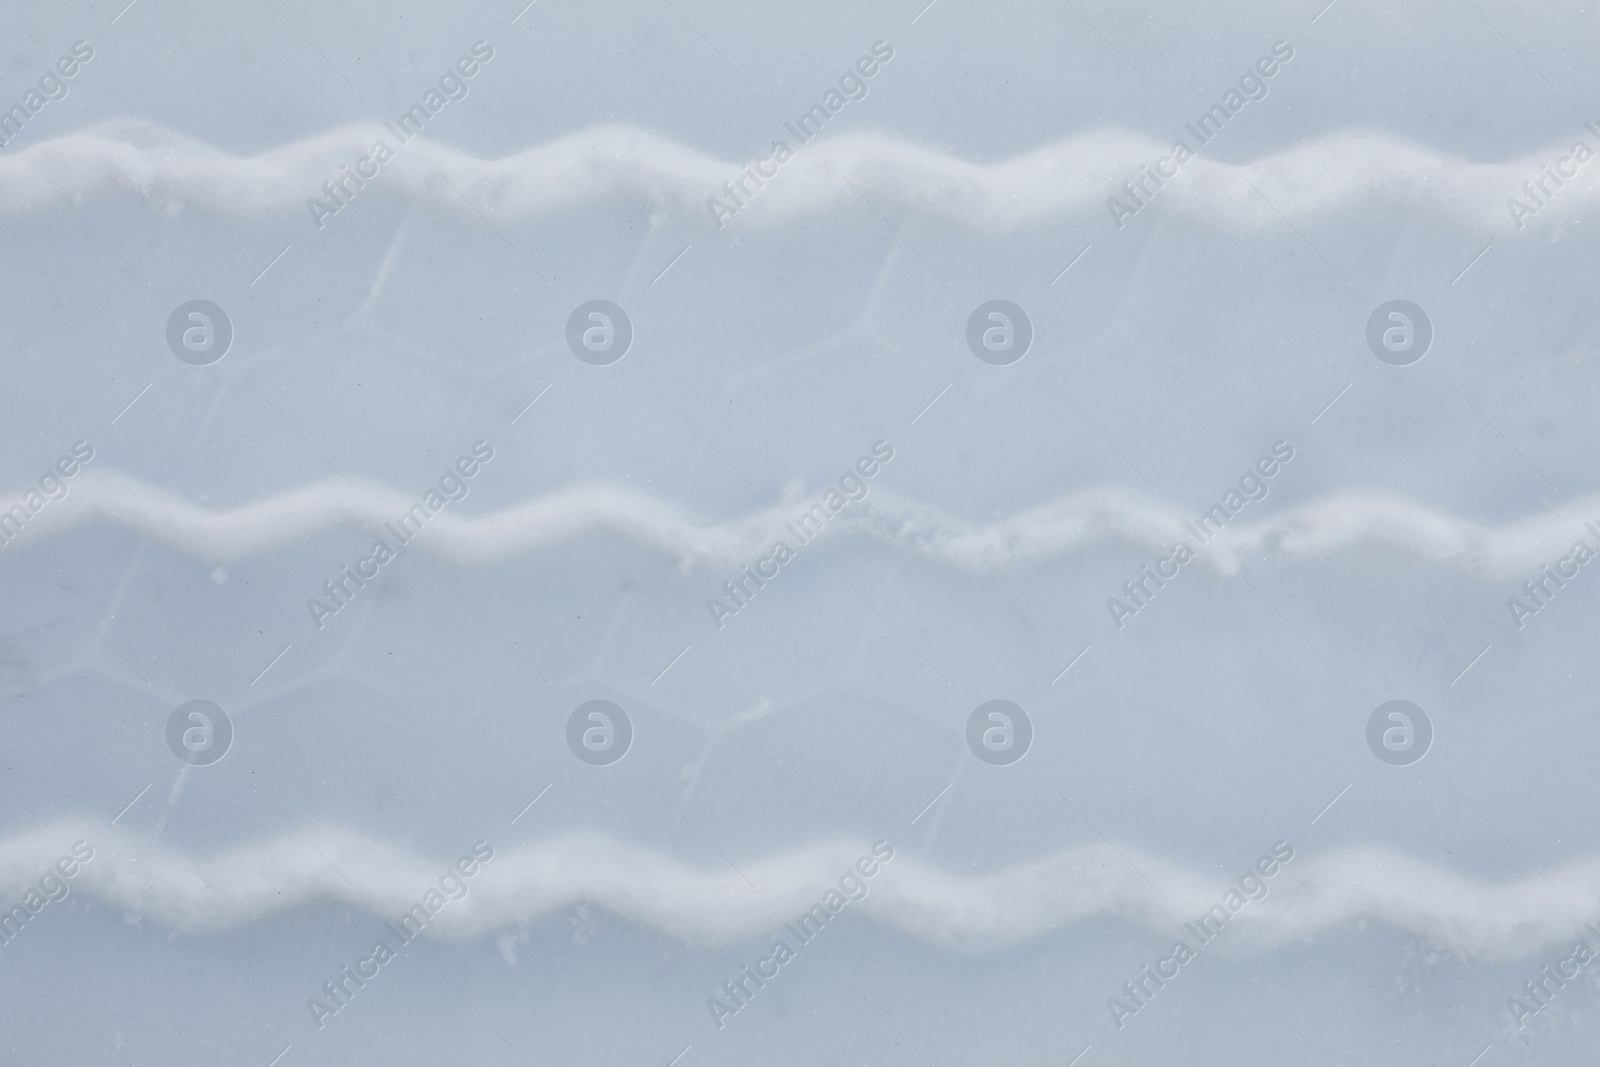 Photo of Car tire track on snow outdoors, top view. Winter season